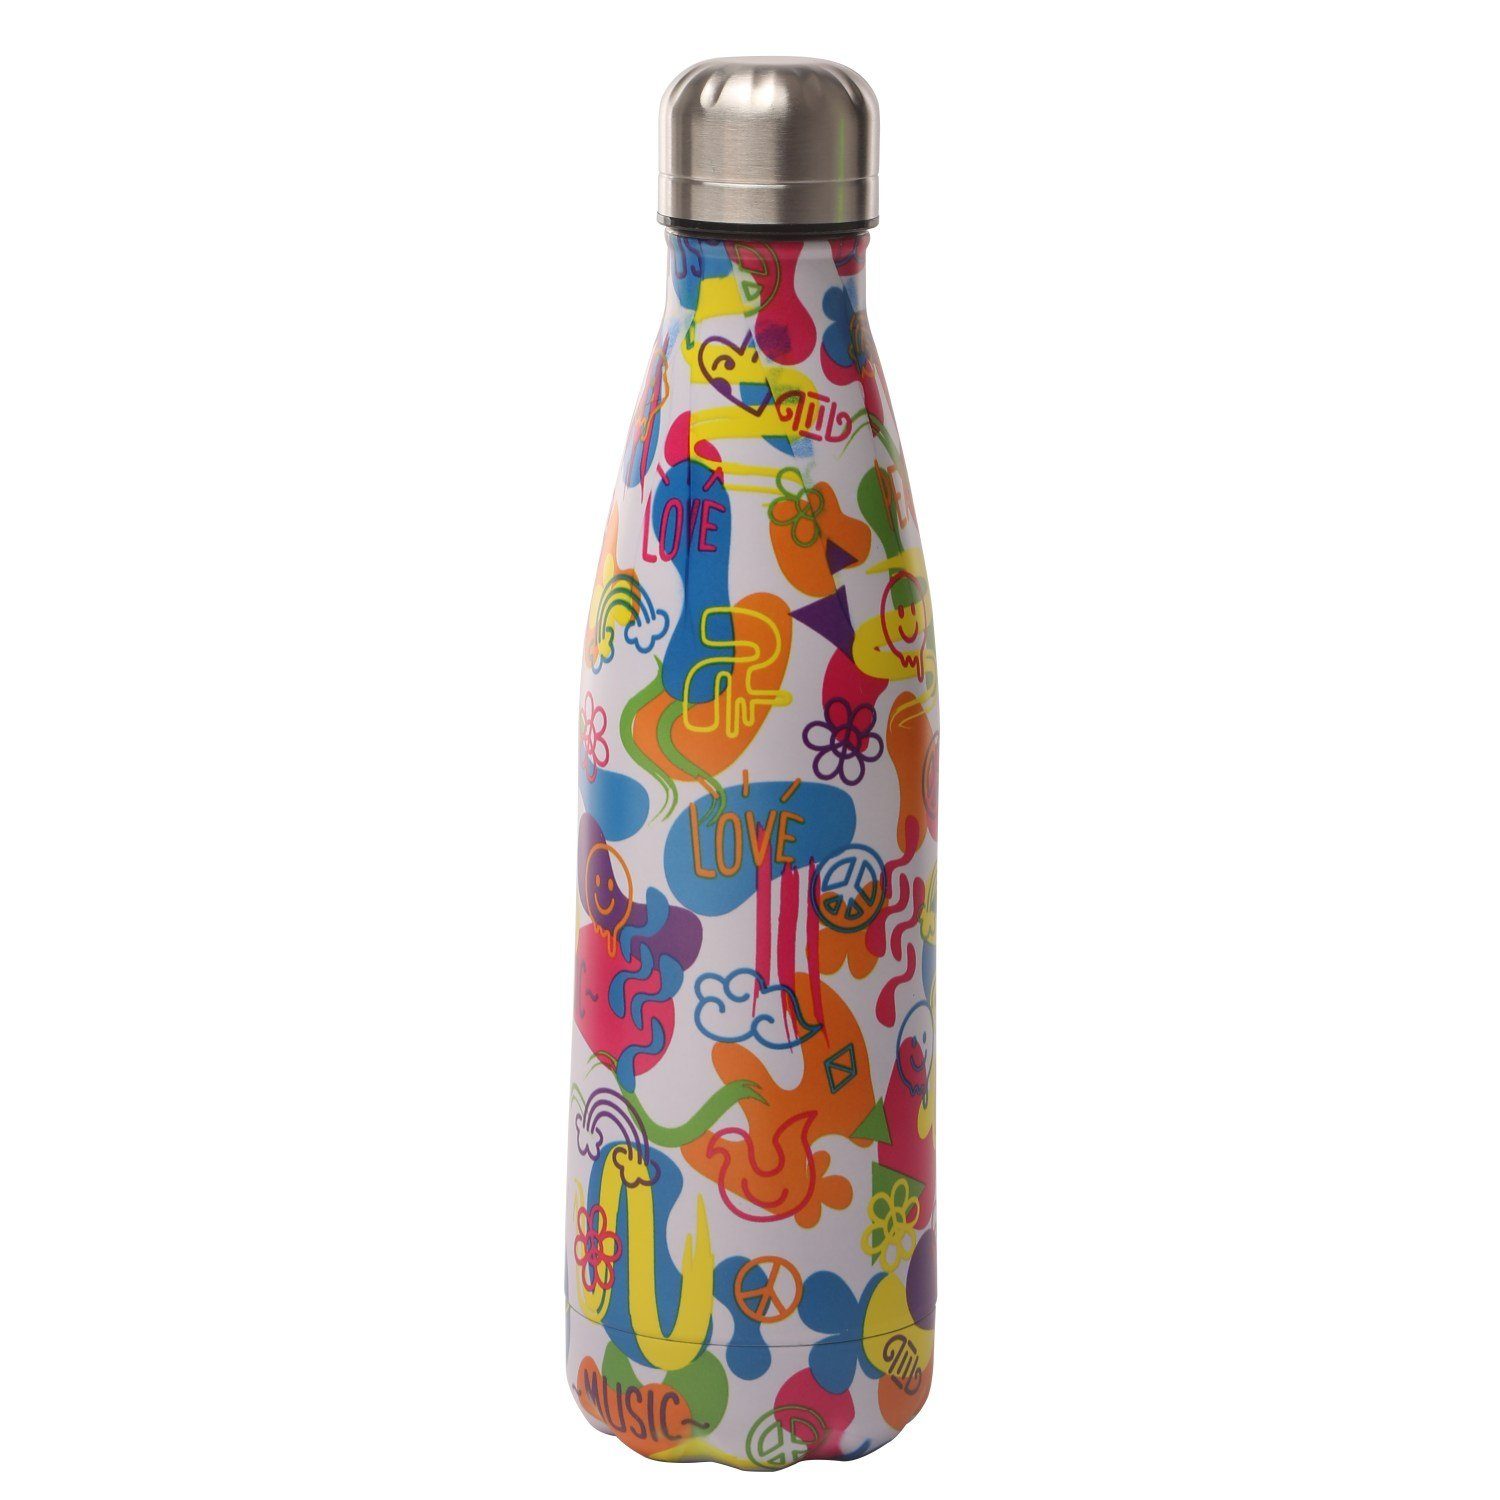 Step by Jungle Babystiefel Edelstahl-Trinkflasche Step Xanadoo Peace Youngster-Line 500ml